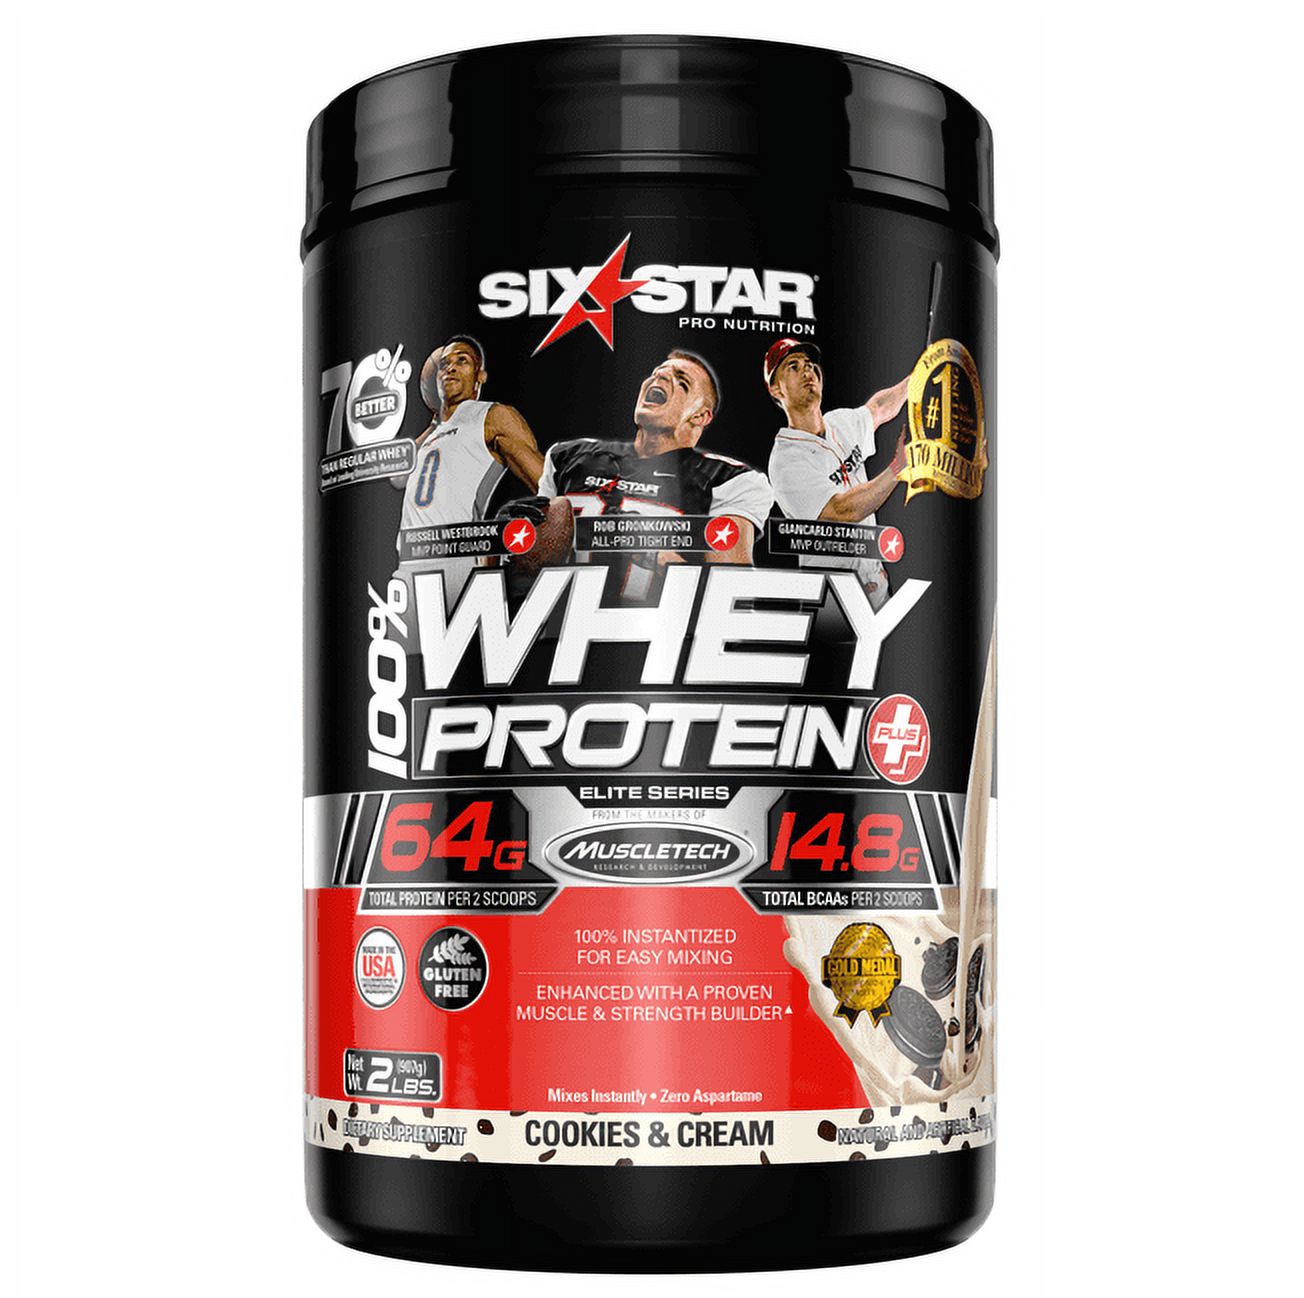 Six Star Pro 100% Whey Protein Powder, 32g Ultra-Pure Whey Protein, Cookies & Cream, 2lbs - image 1 of 7